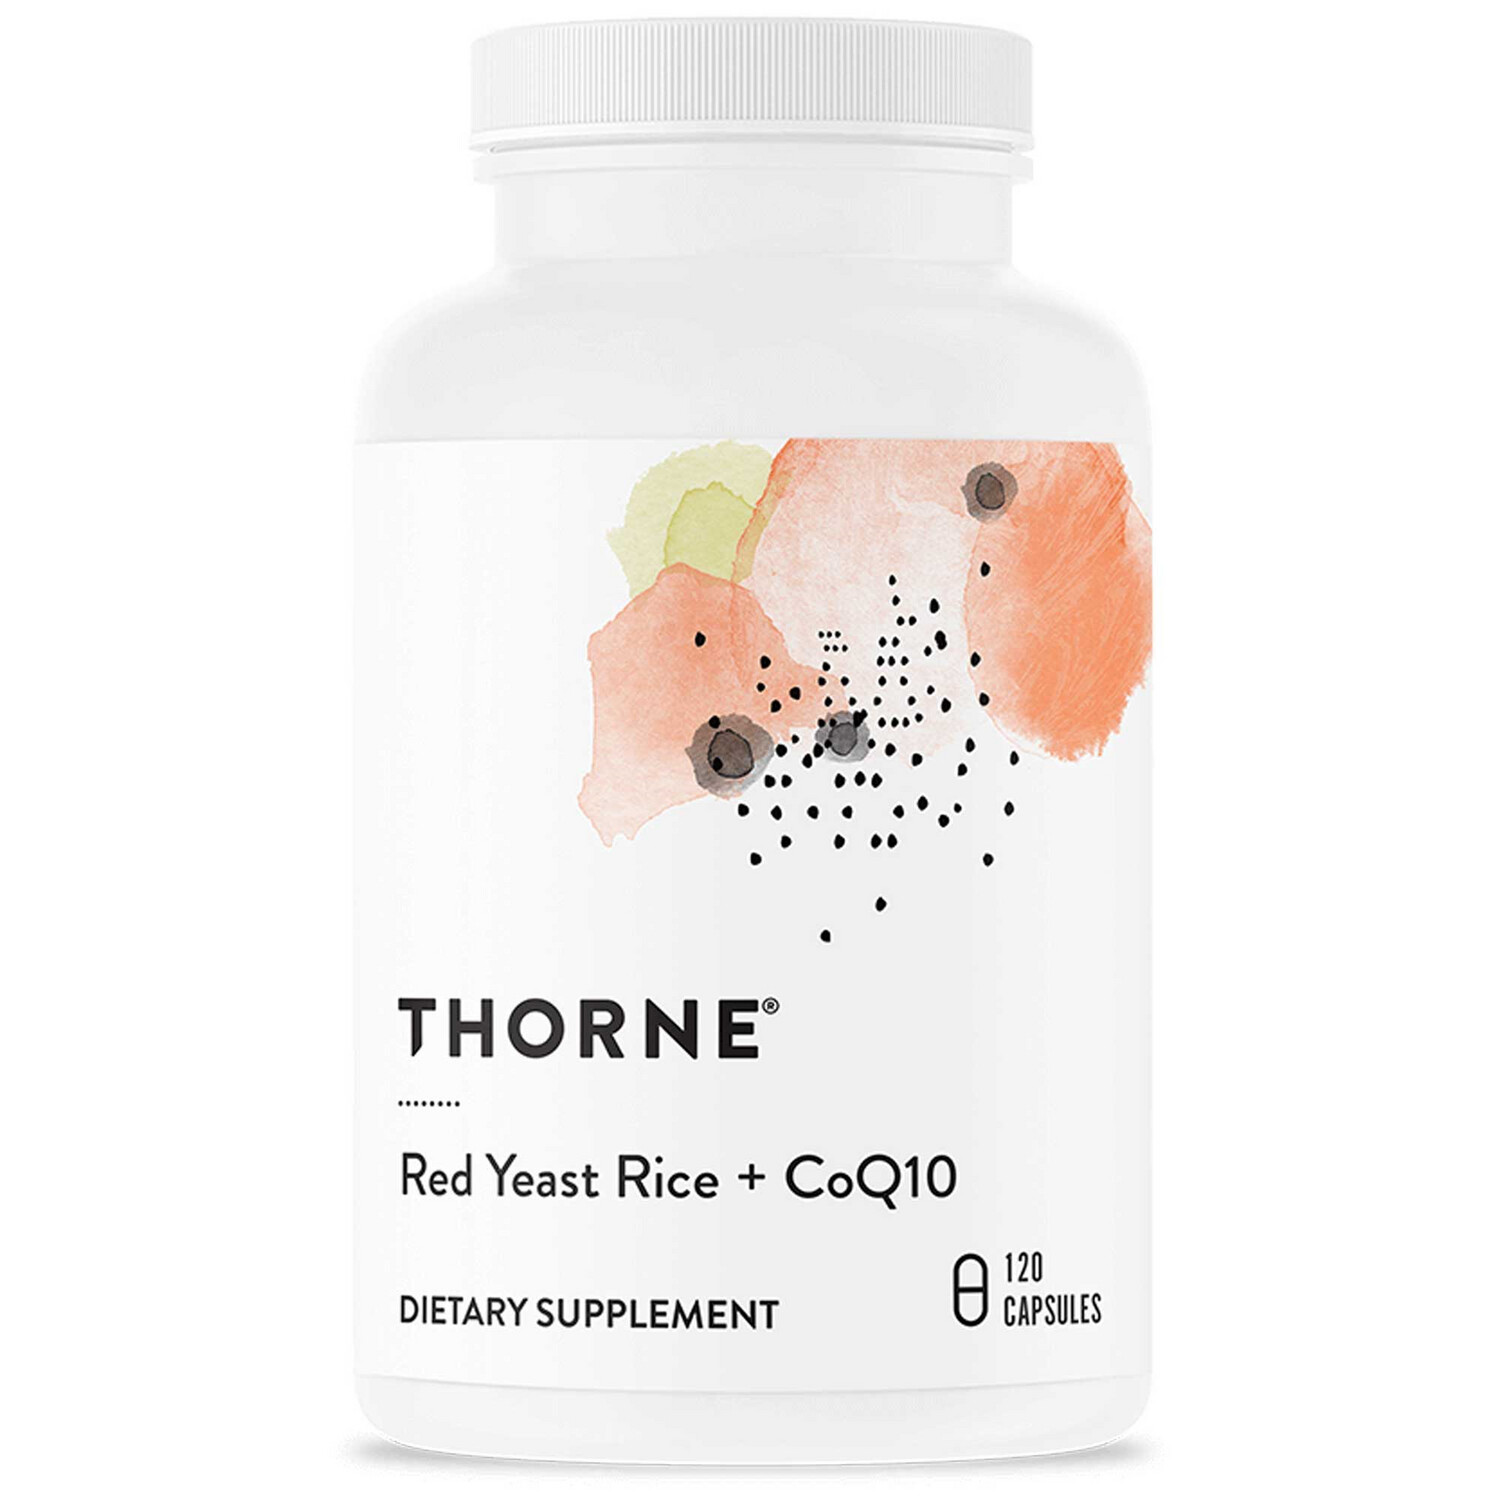 Thorne Choleast Red Yeast Rice with CoQ10 120 count